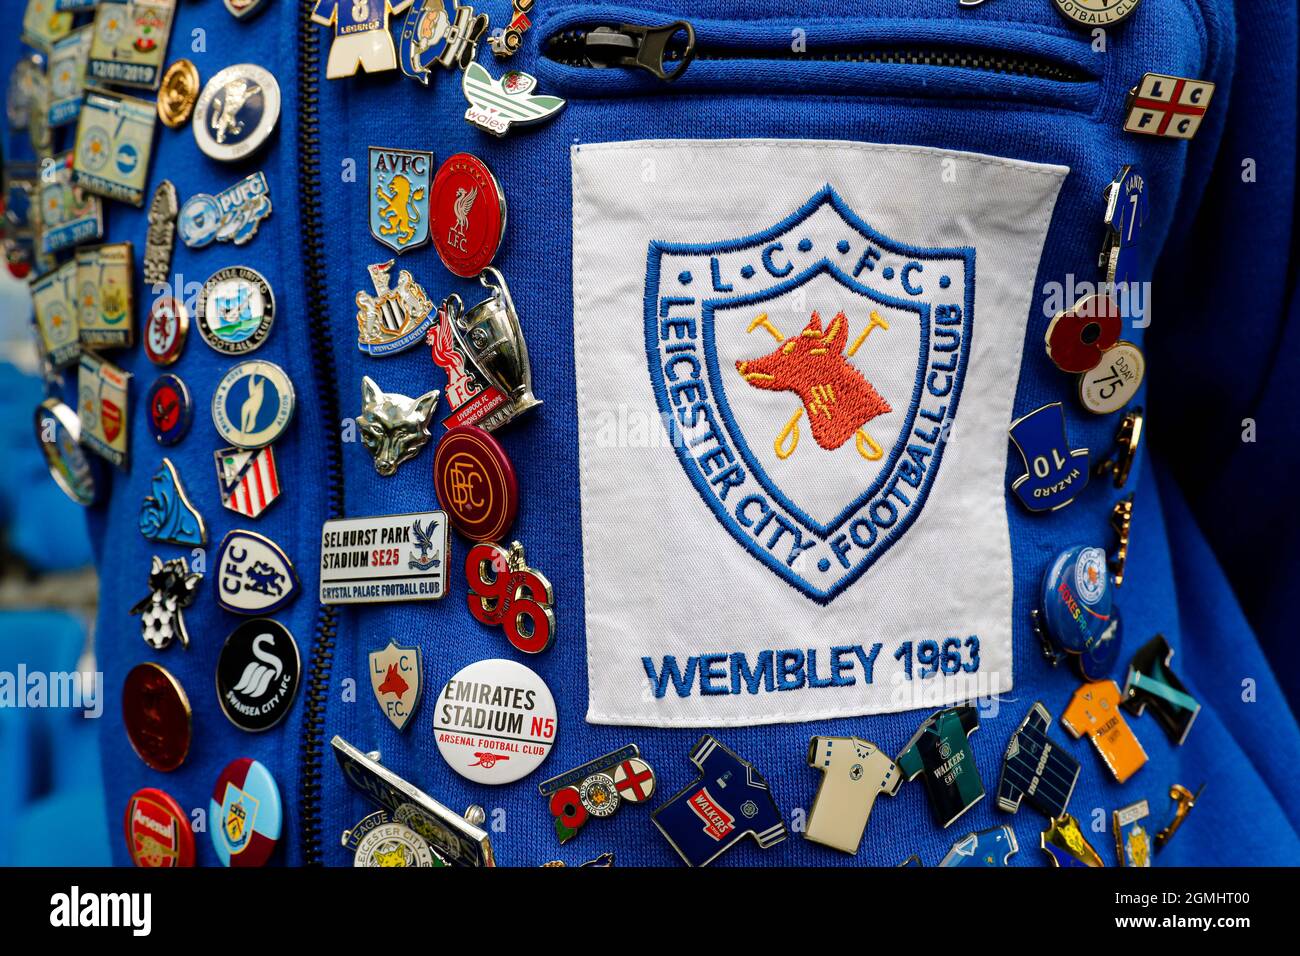 CITY PIN BADGES  We have a - Cardiff City Supporters Club